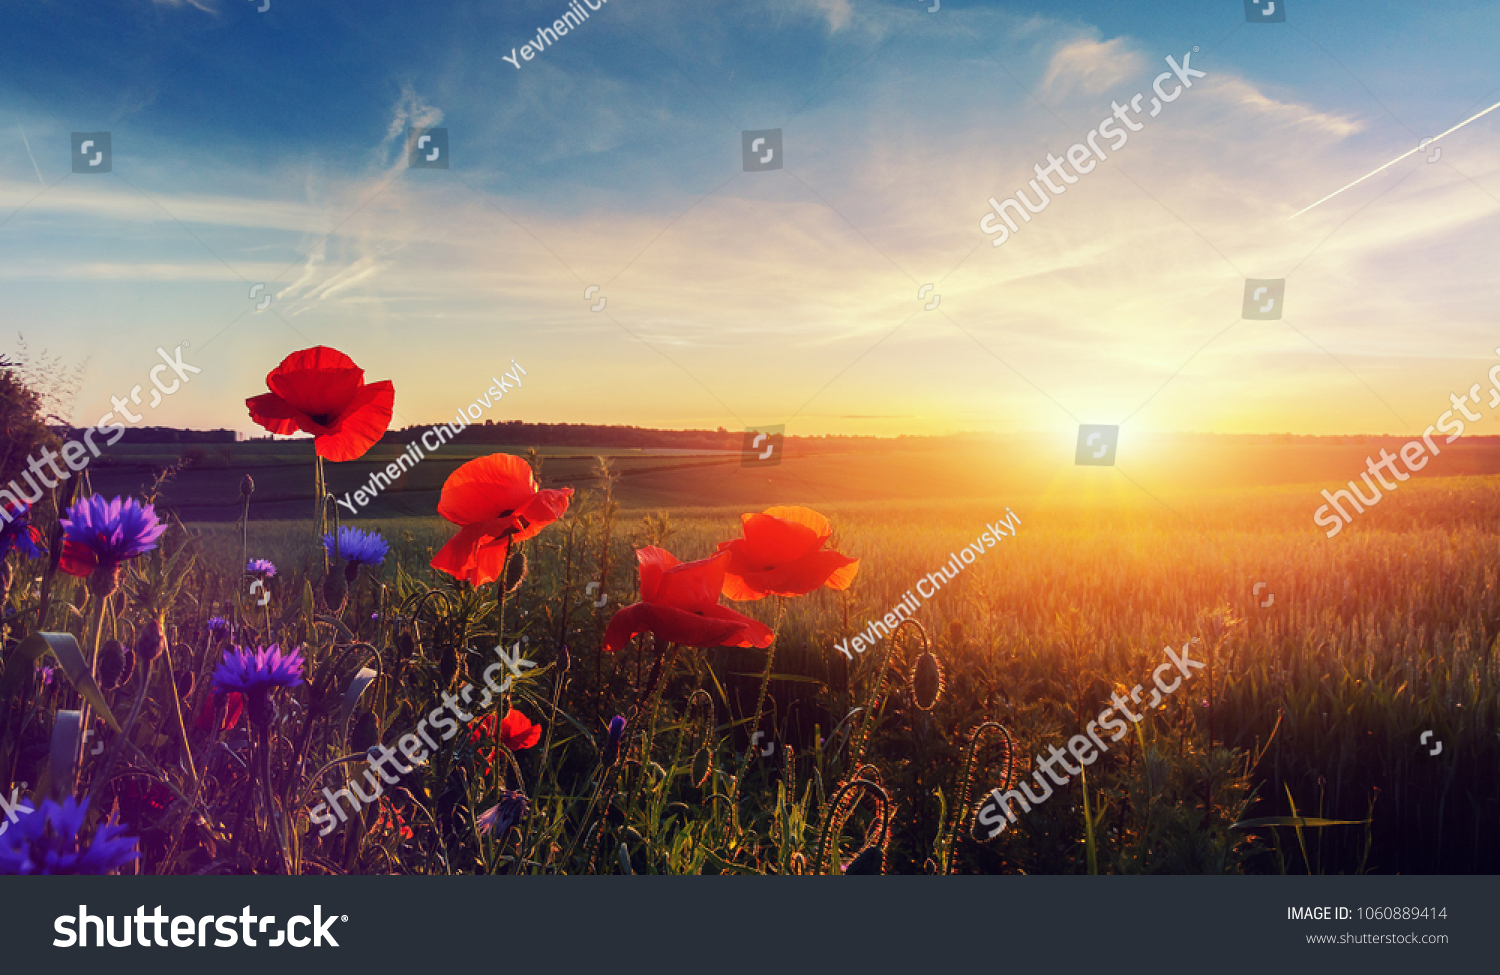 Wonderful landscape during sunrise. Blooming red poppies on field against the sun, blue sky. Wild flowers in springtime. Beautiful natural landscape in the summertime. Amazing nature Sunny scene.  #1060889414